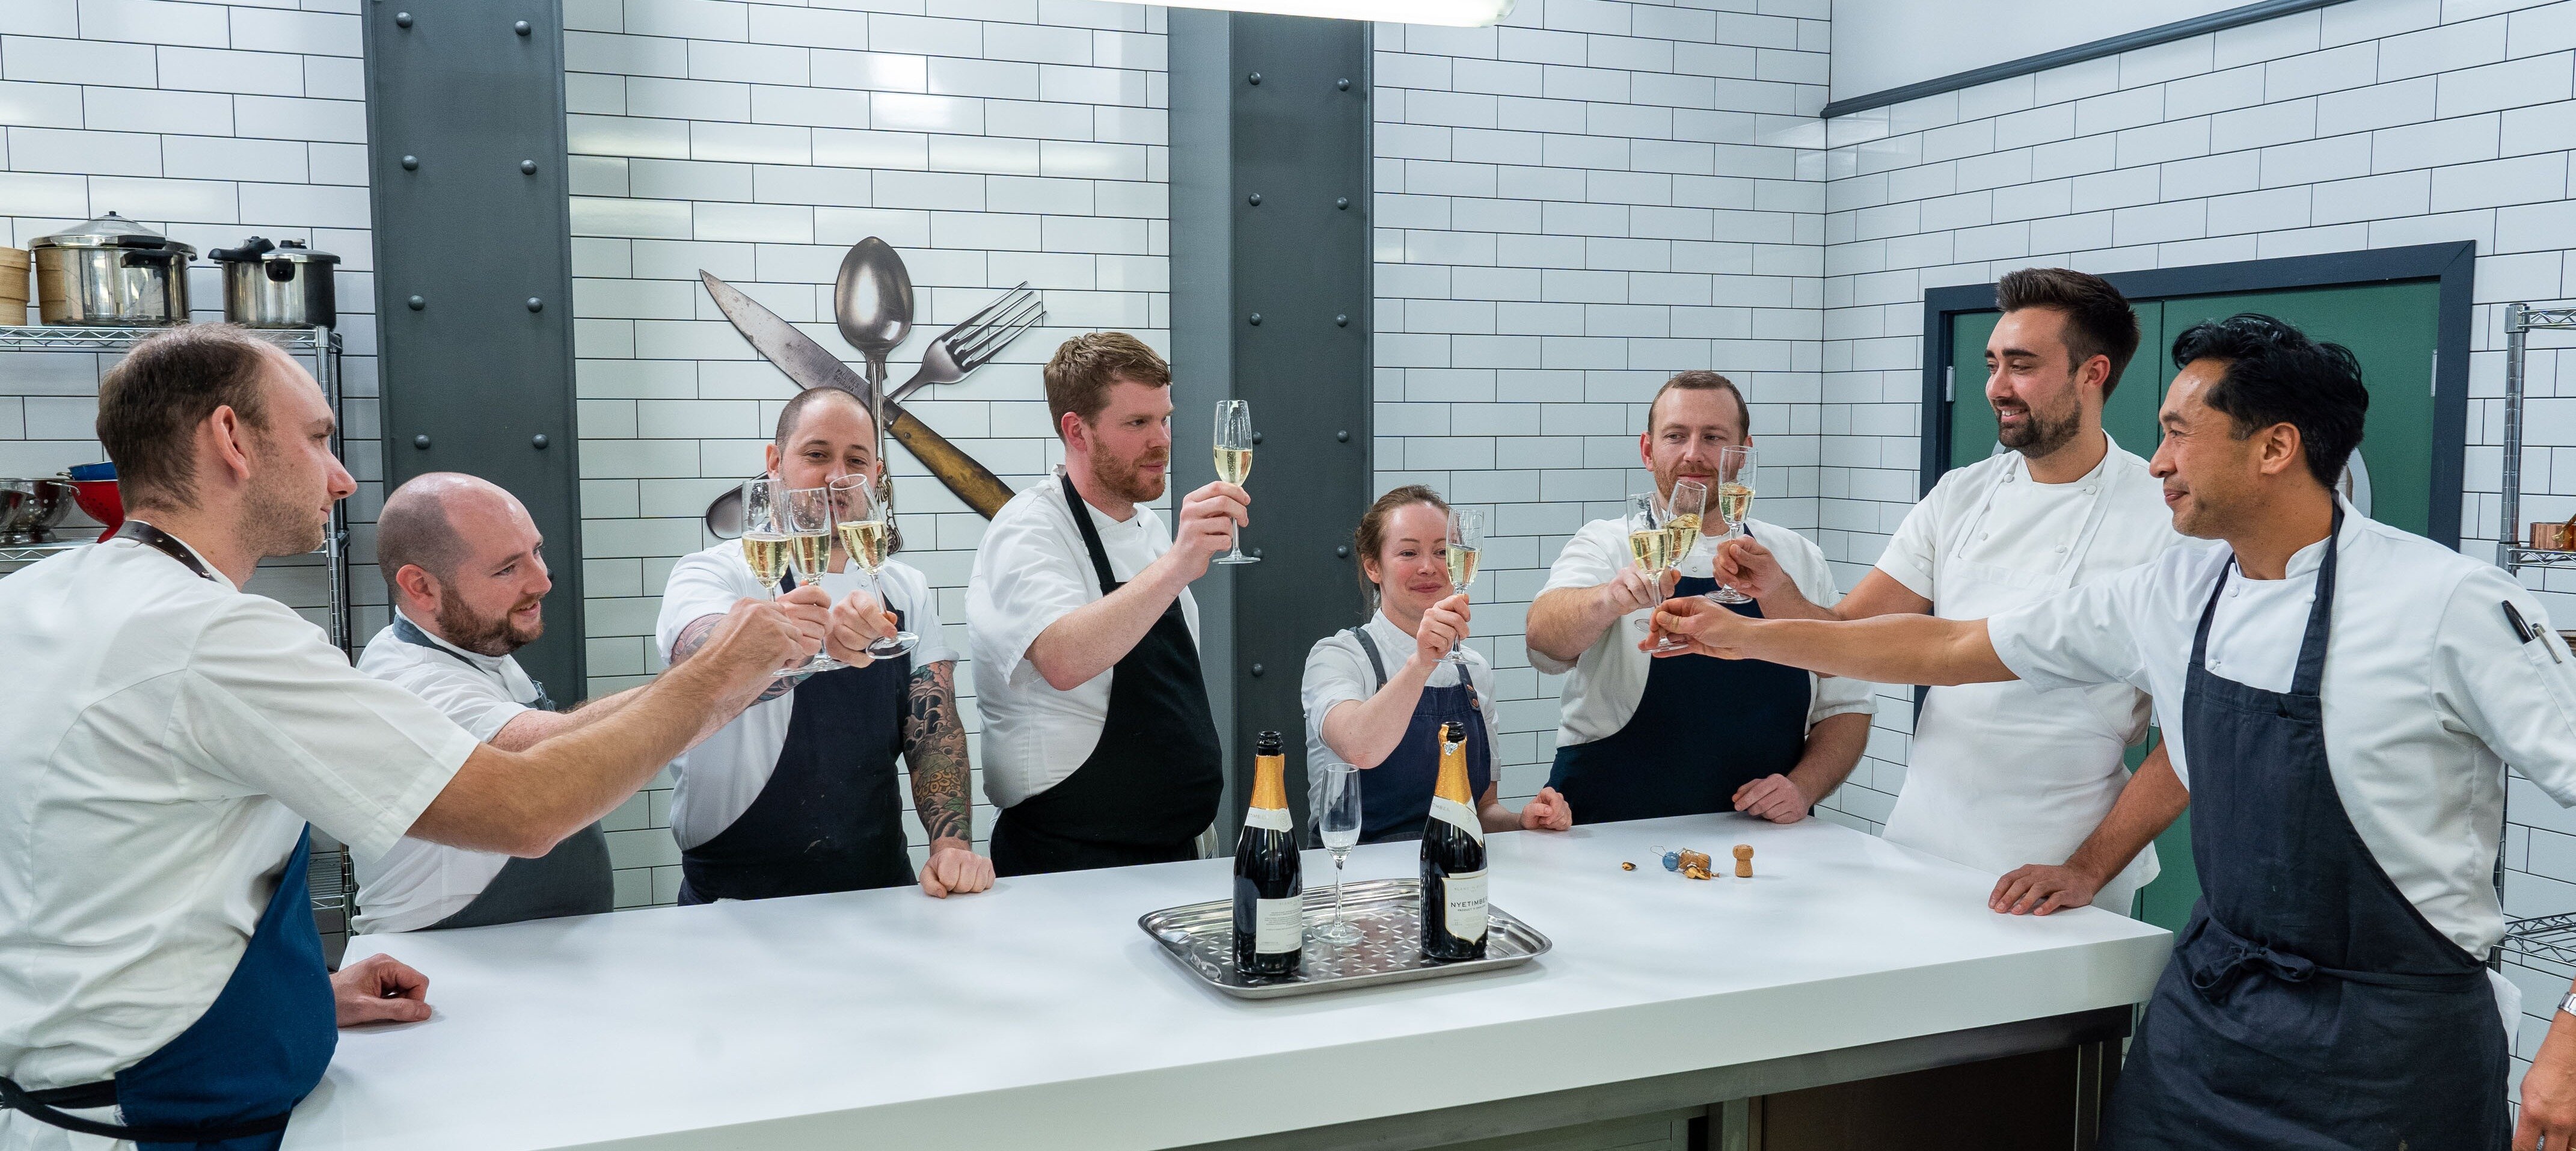 Full chef line-up for Great British Menu banquet revealed